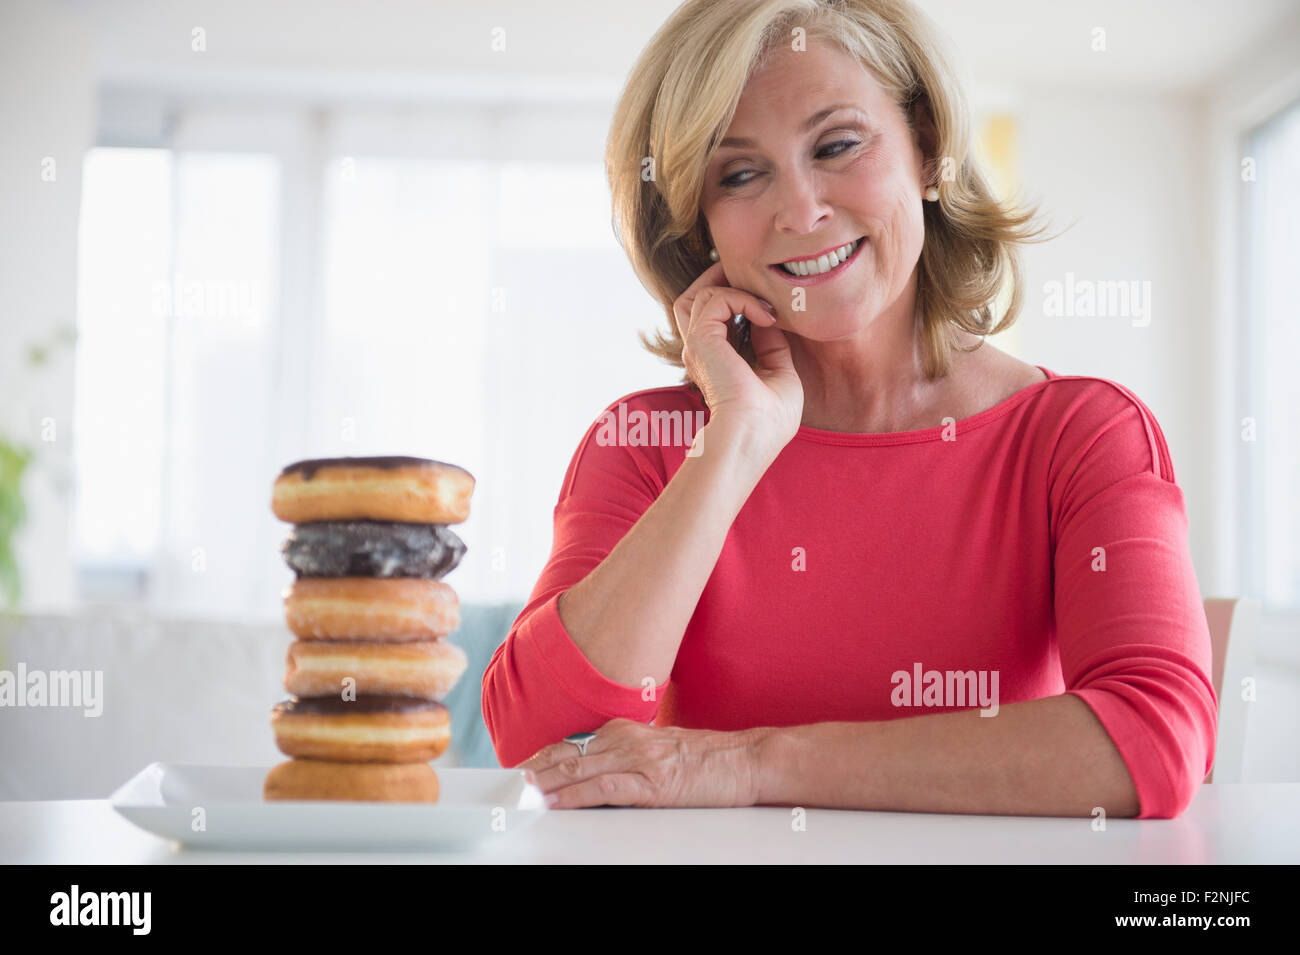 Caucasian woman admiring stack of donuts on table Stock Photo